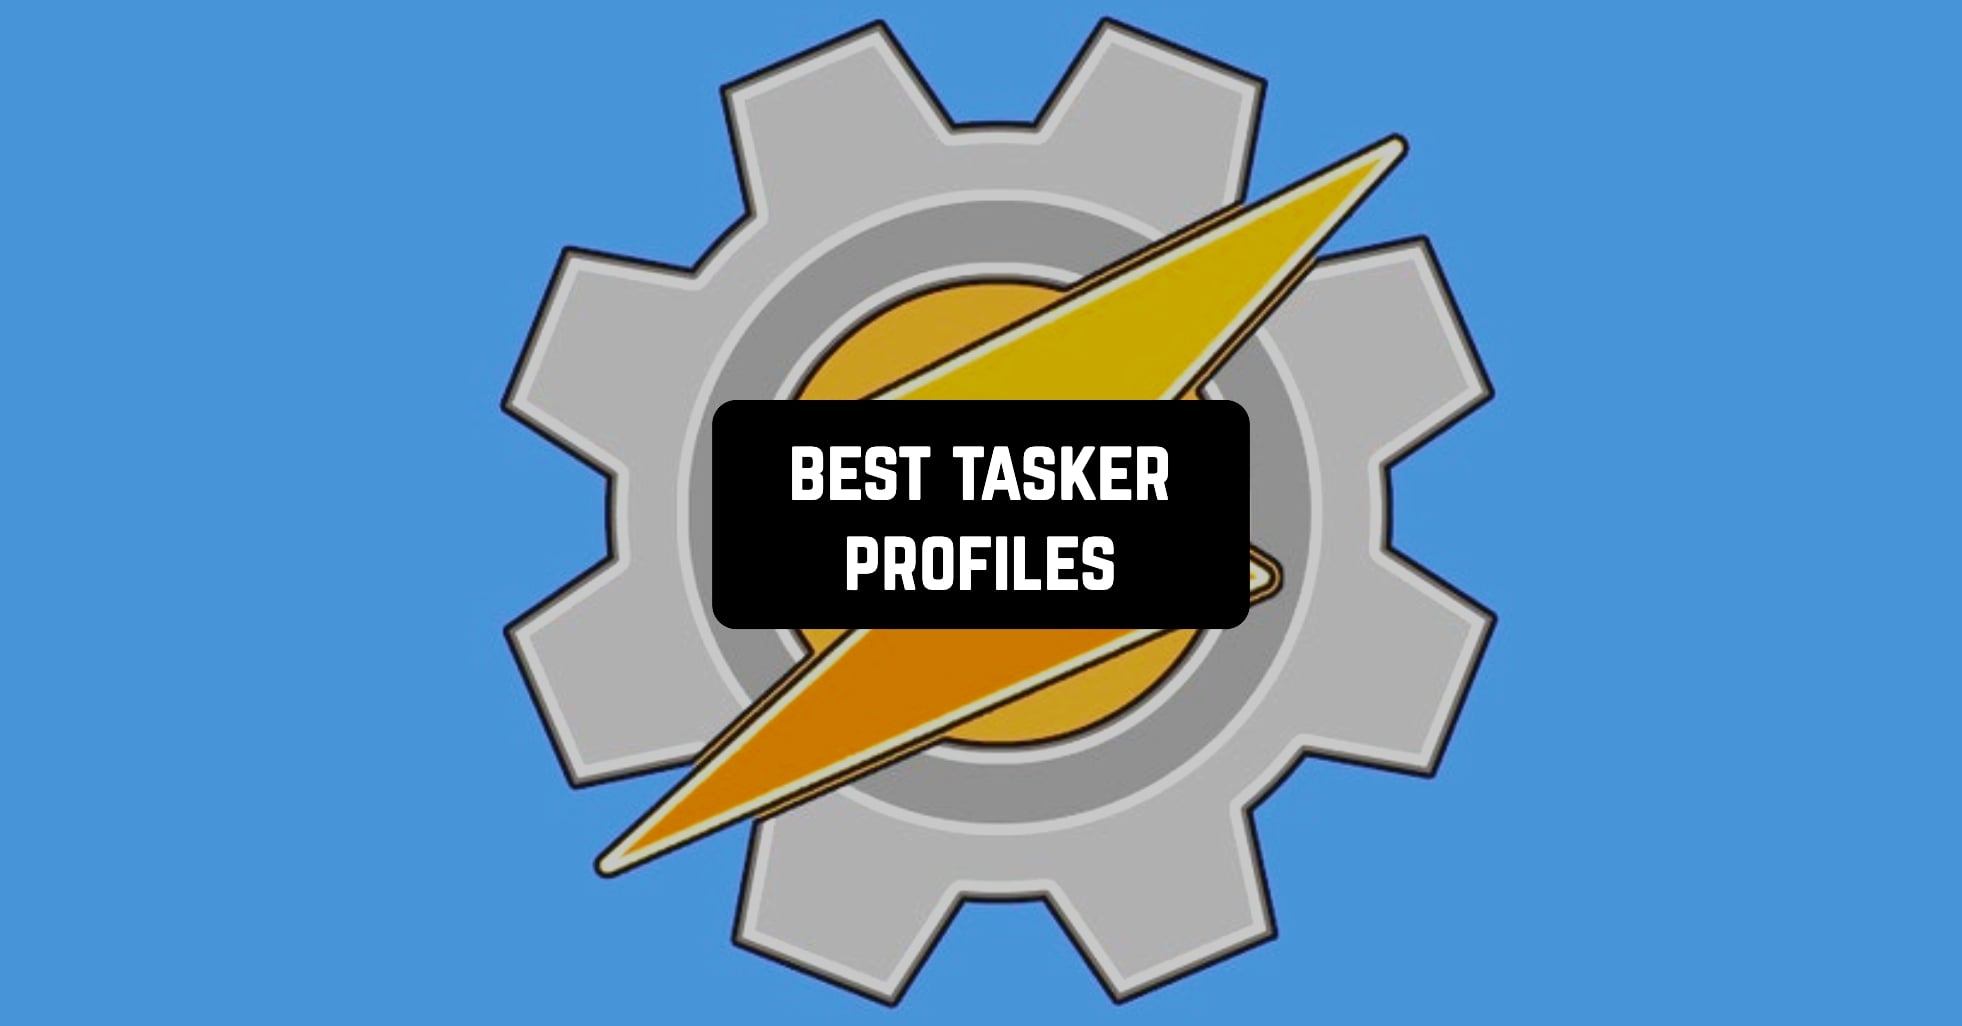 Overskyet Skulptur kaos 41 Best Tasker Profiles 2023 | Freeappsforme - Free apps for Android and iOS